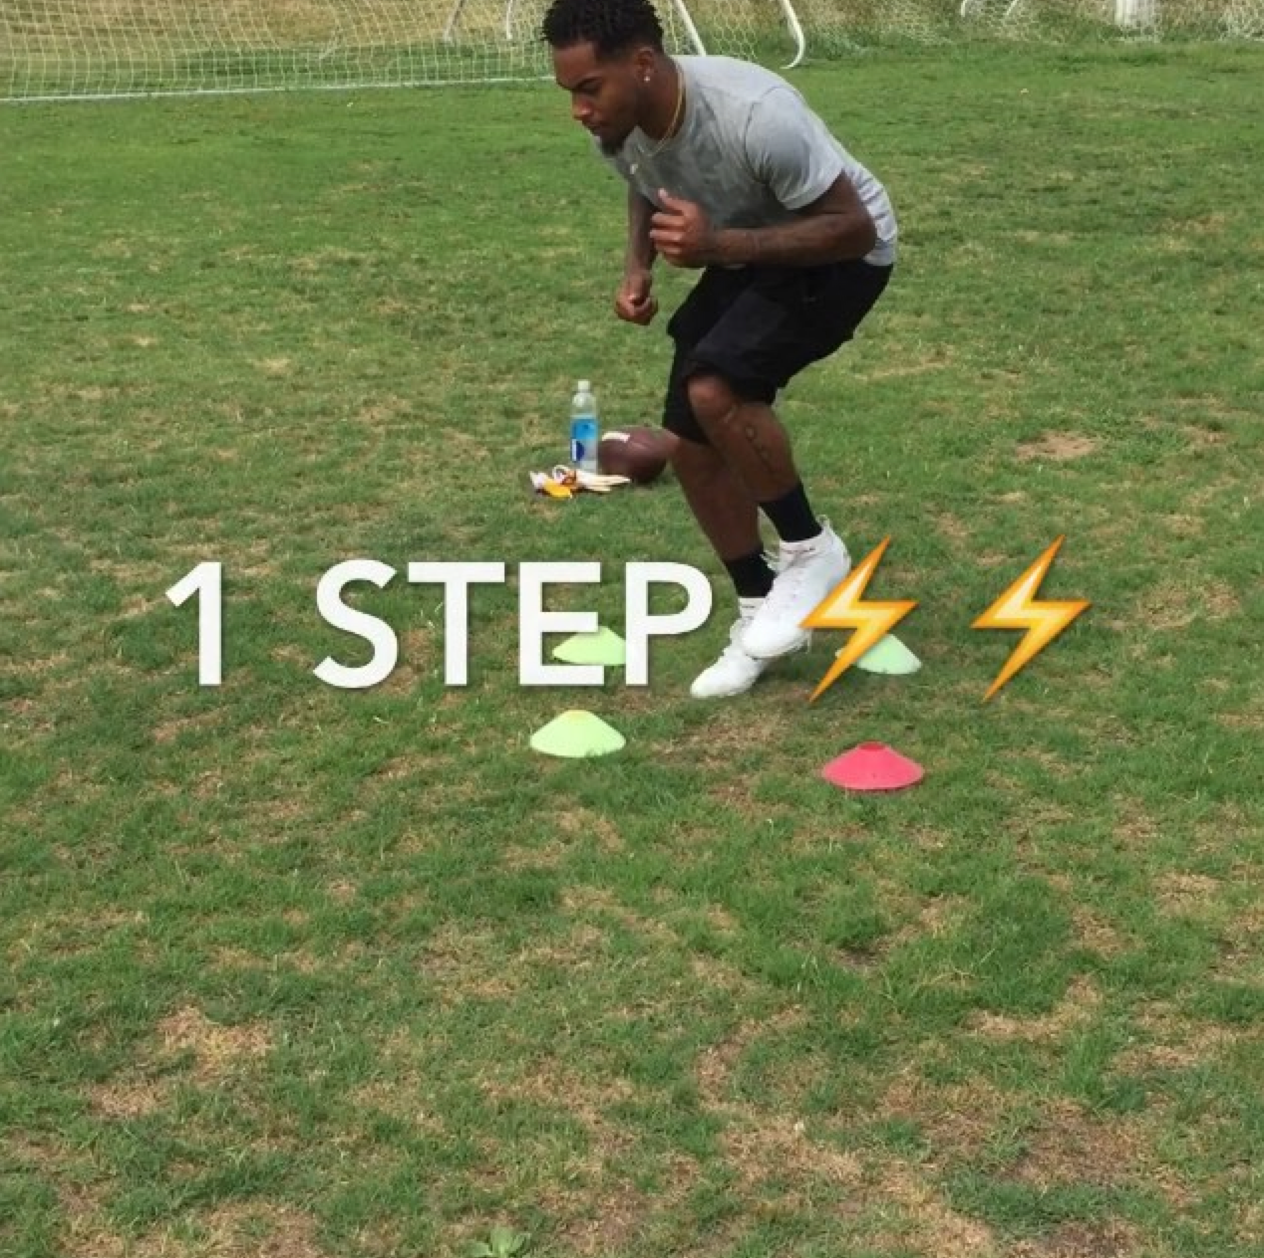 He Shows Us Step-by-Step How He Gets His Workout On&nbsp; - (DeSean Jackson via Instagram)